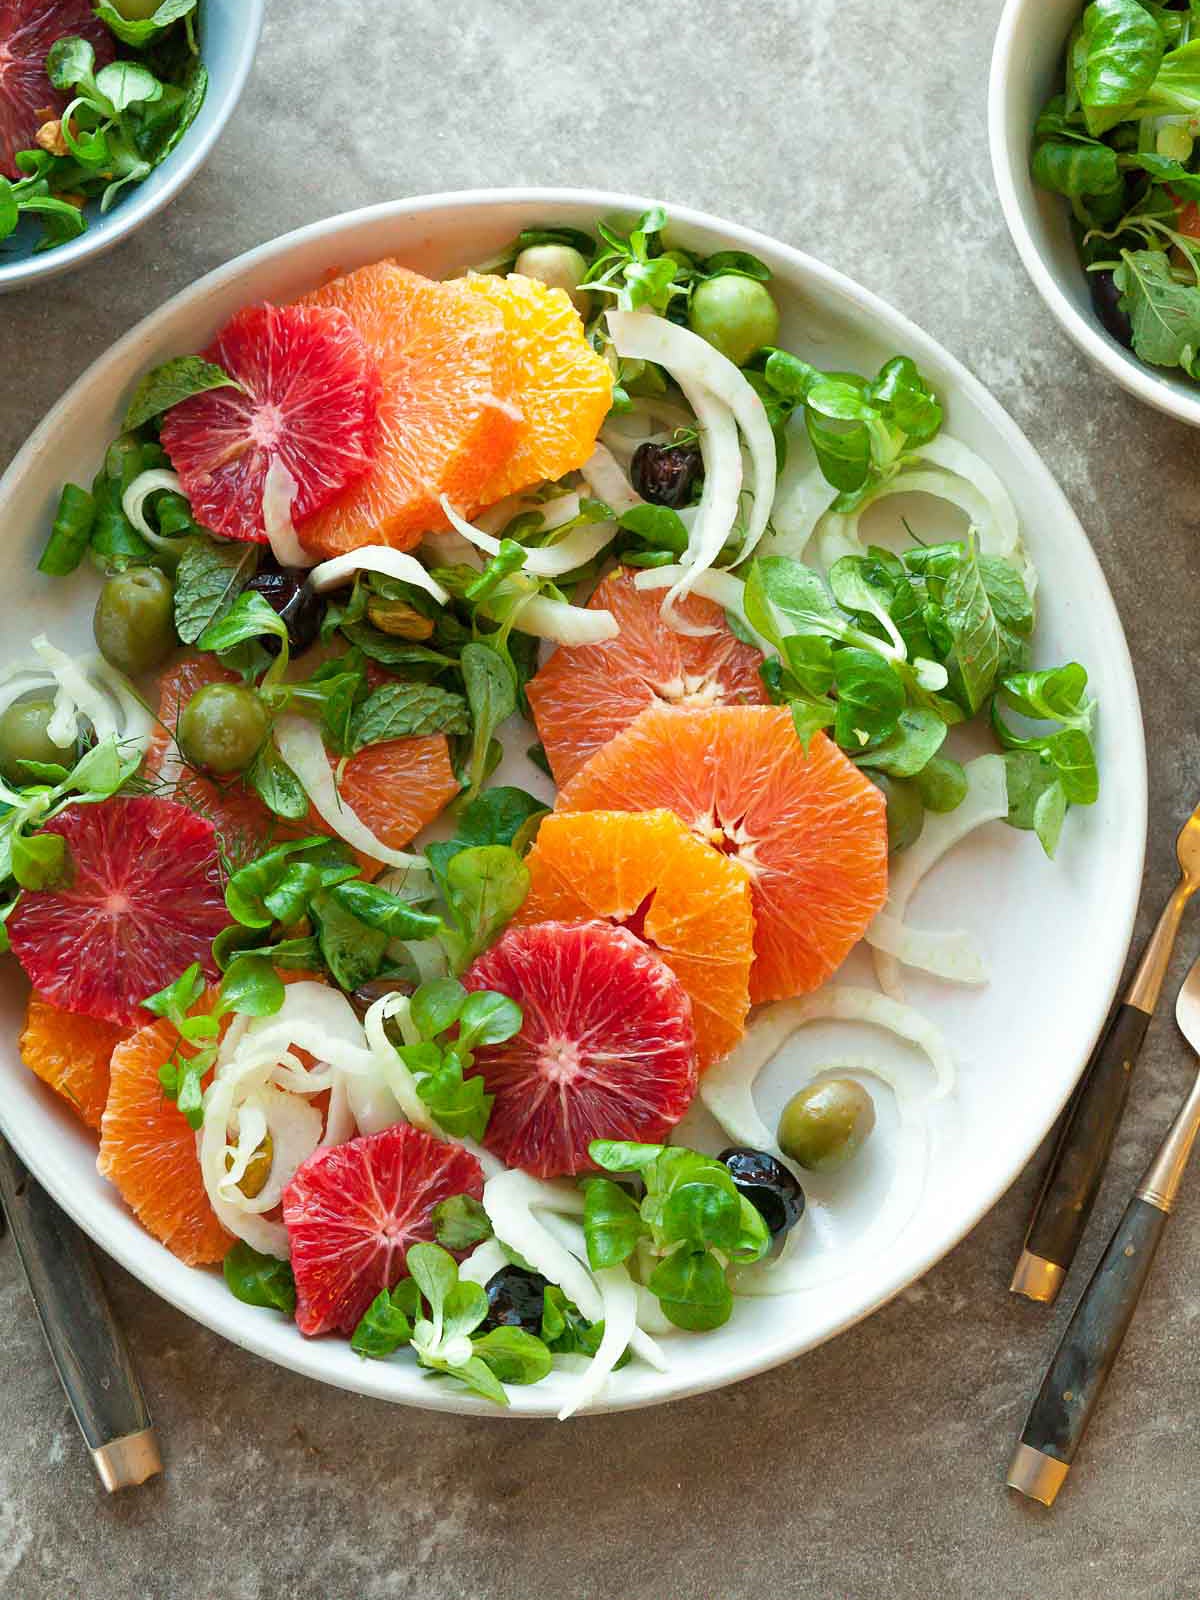 Salad with oranges, olives, and fennel